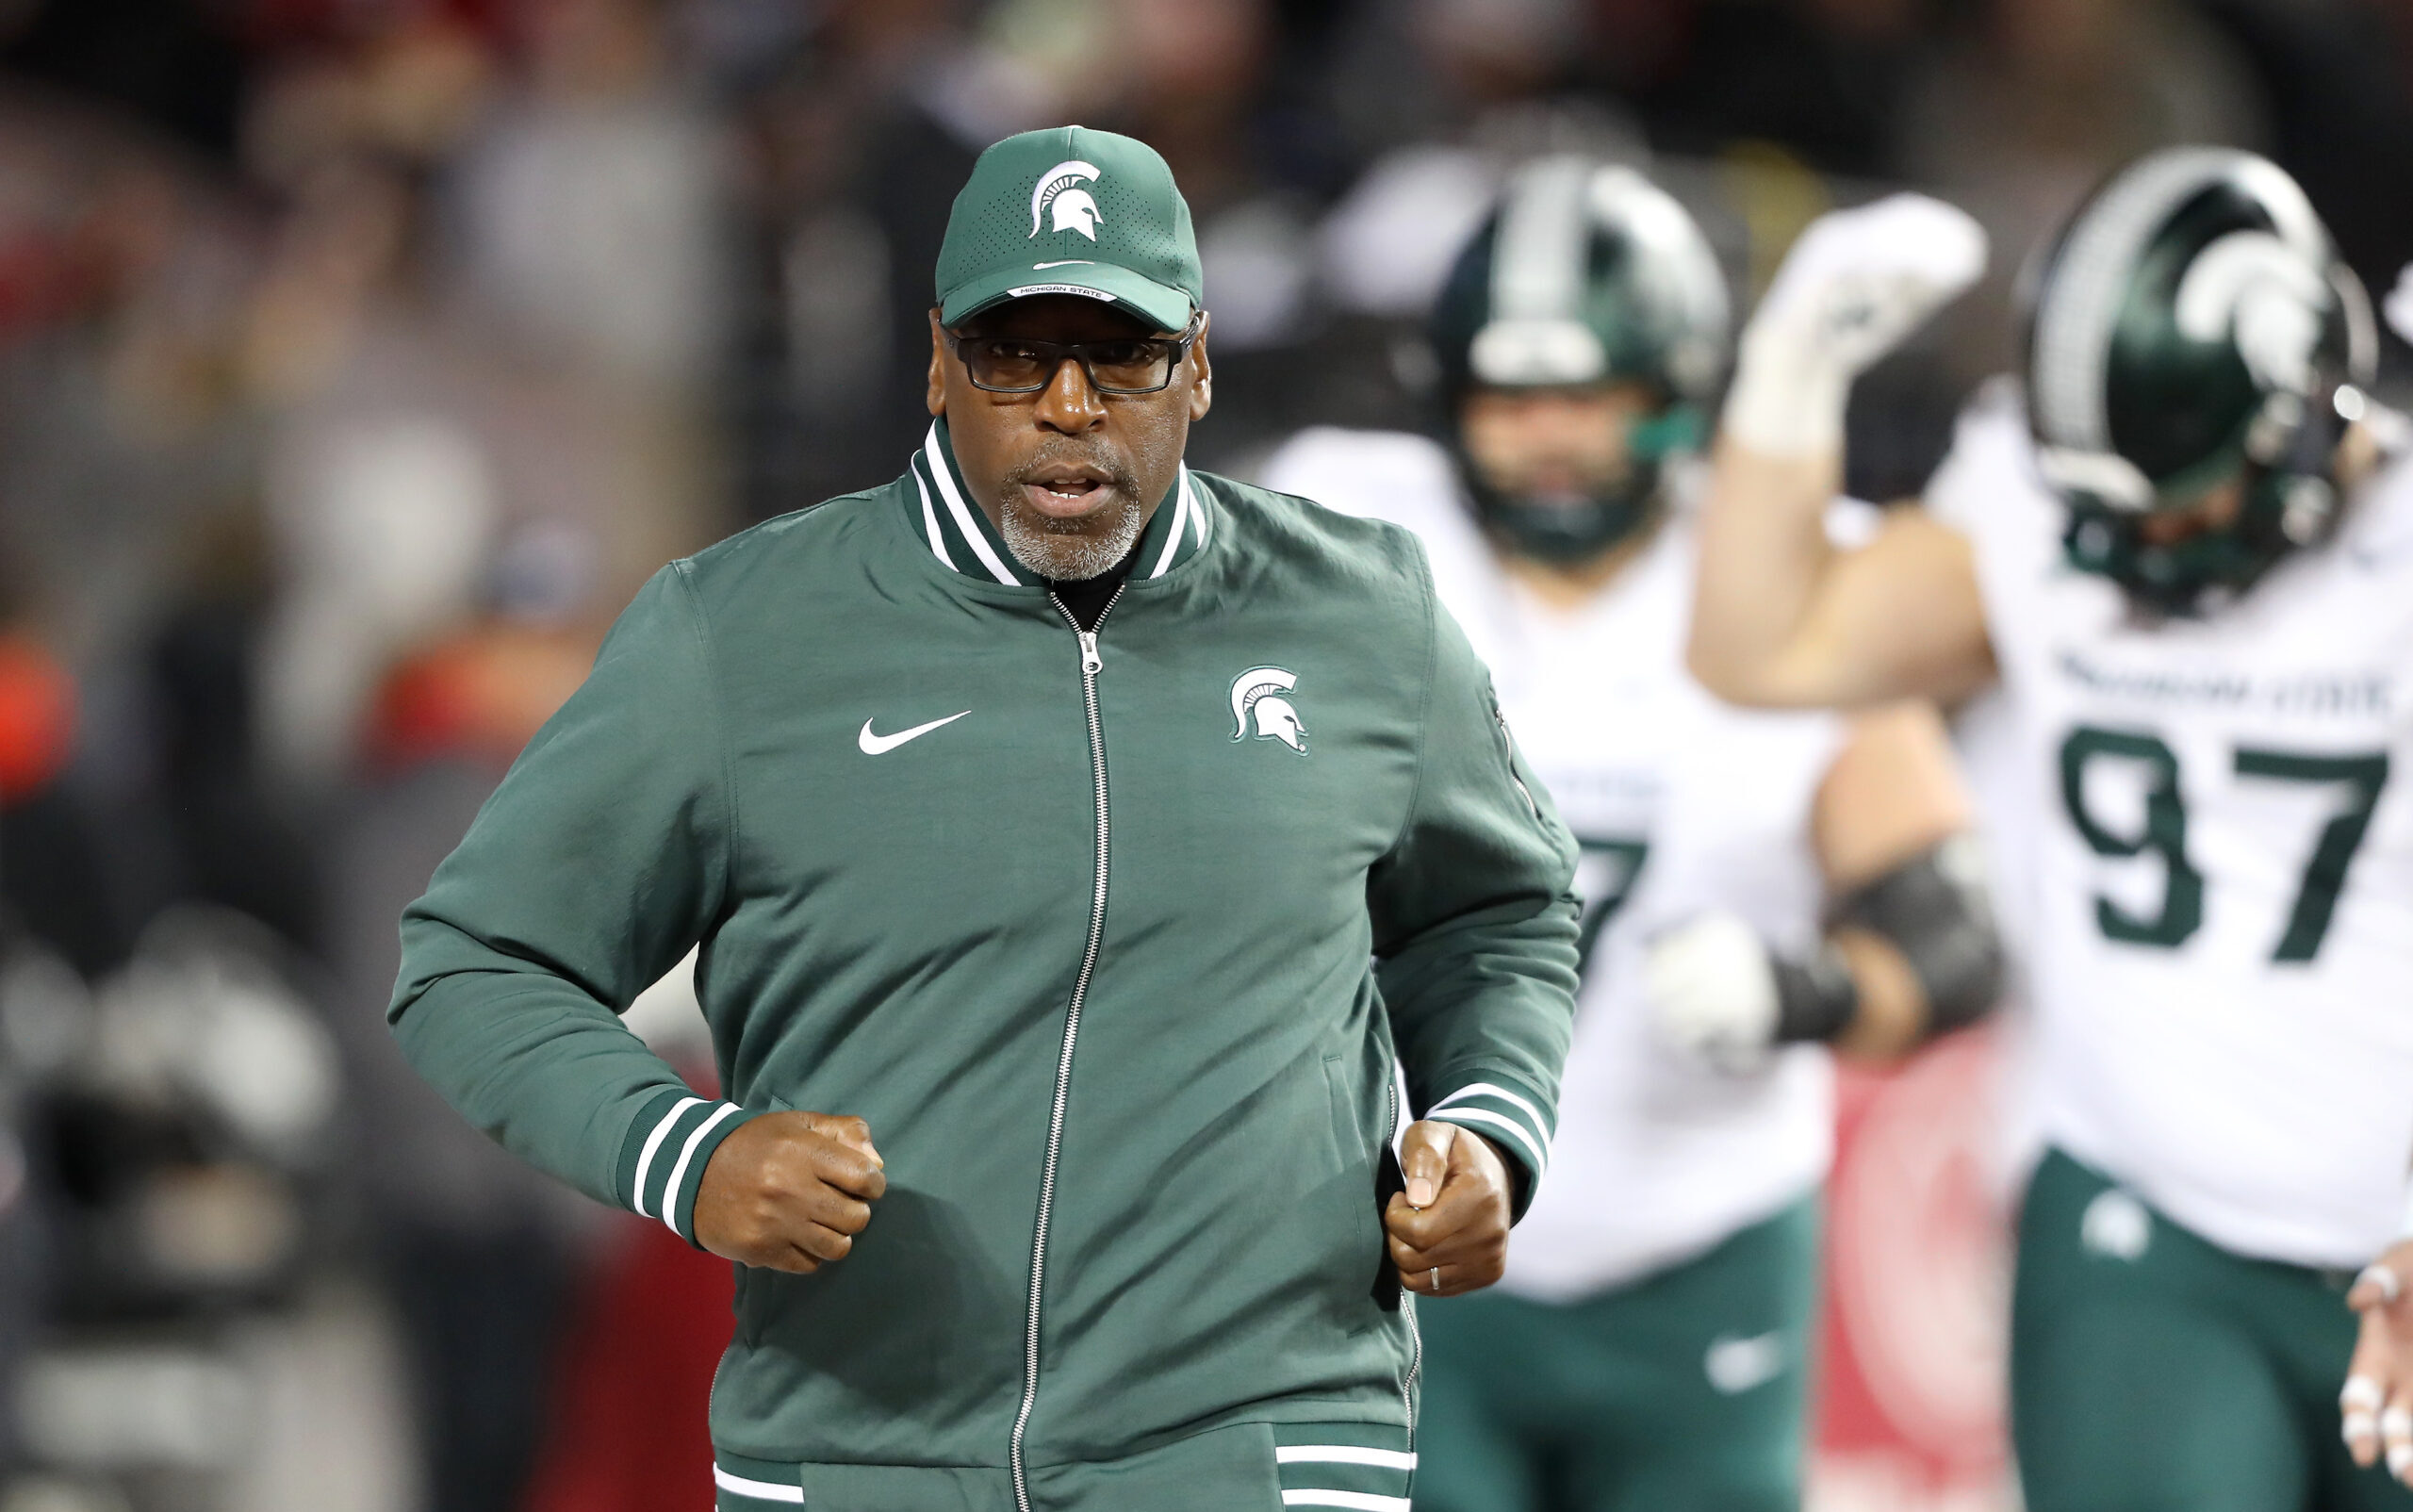 Michigan State travels to take on Indiana football